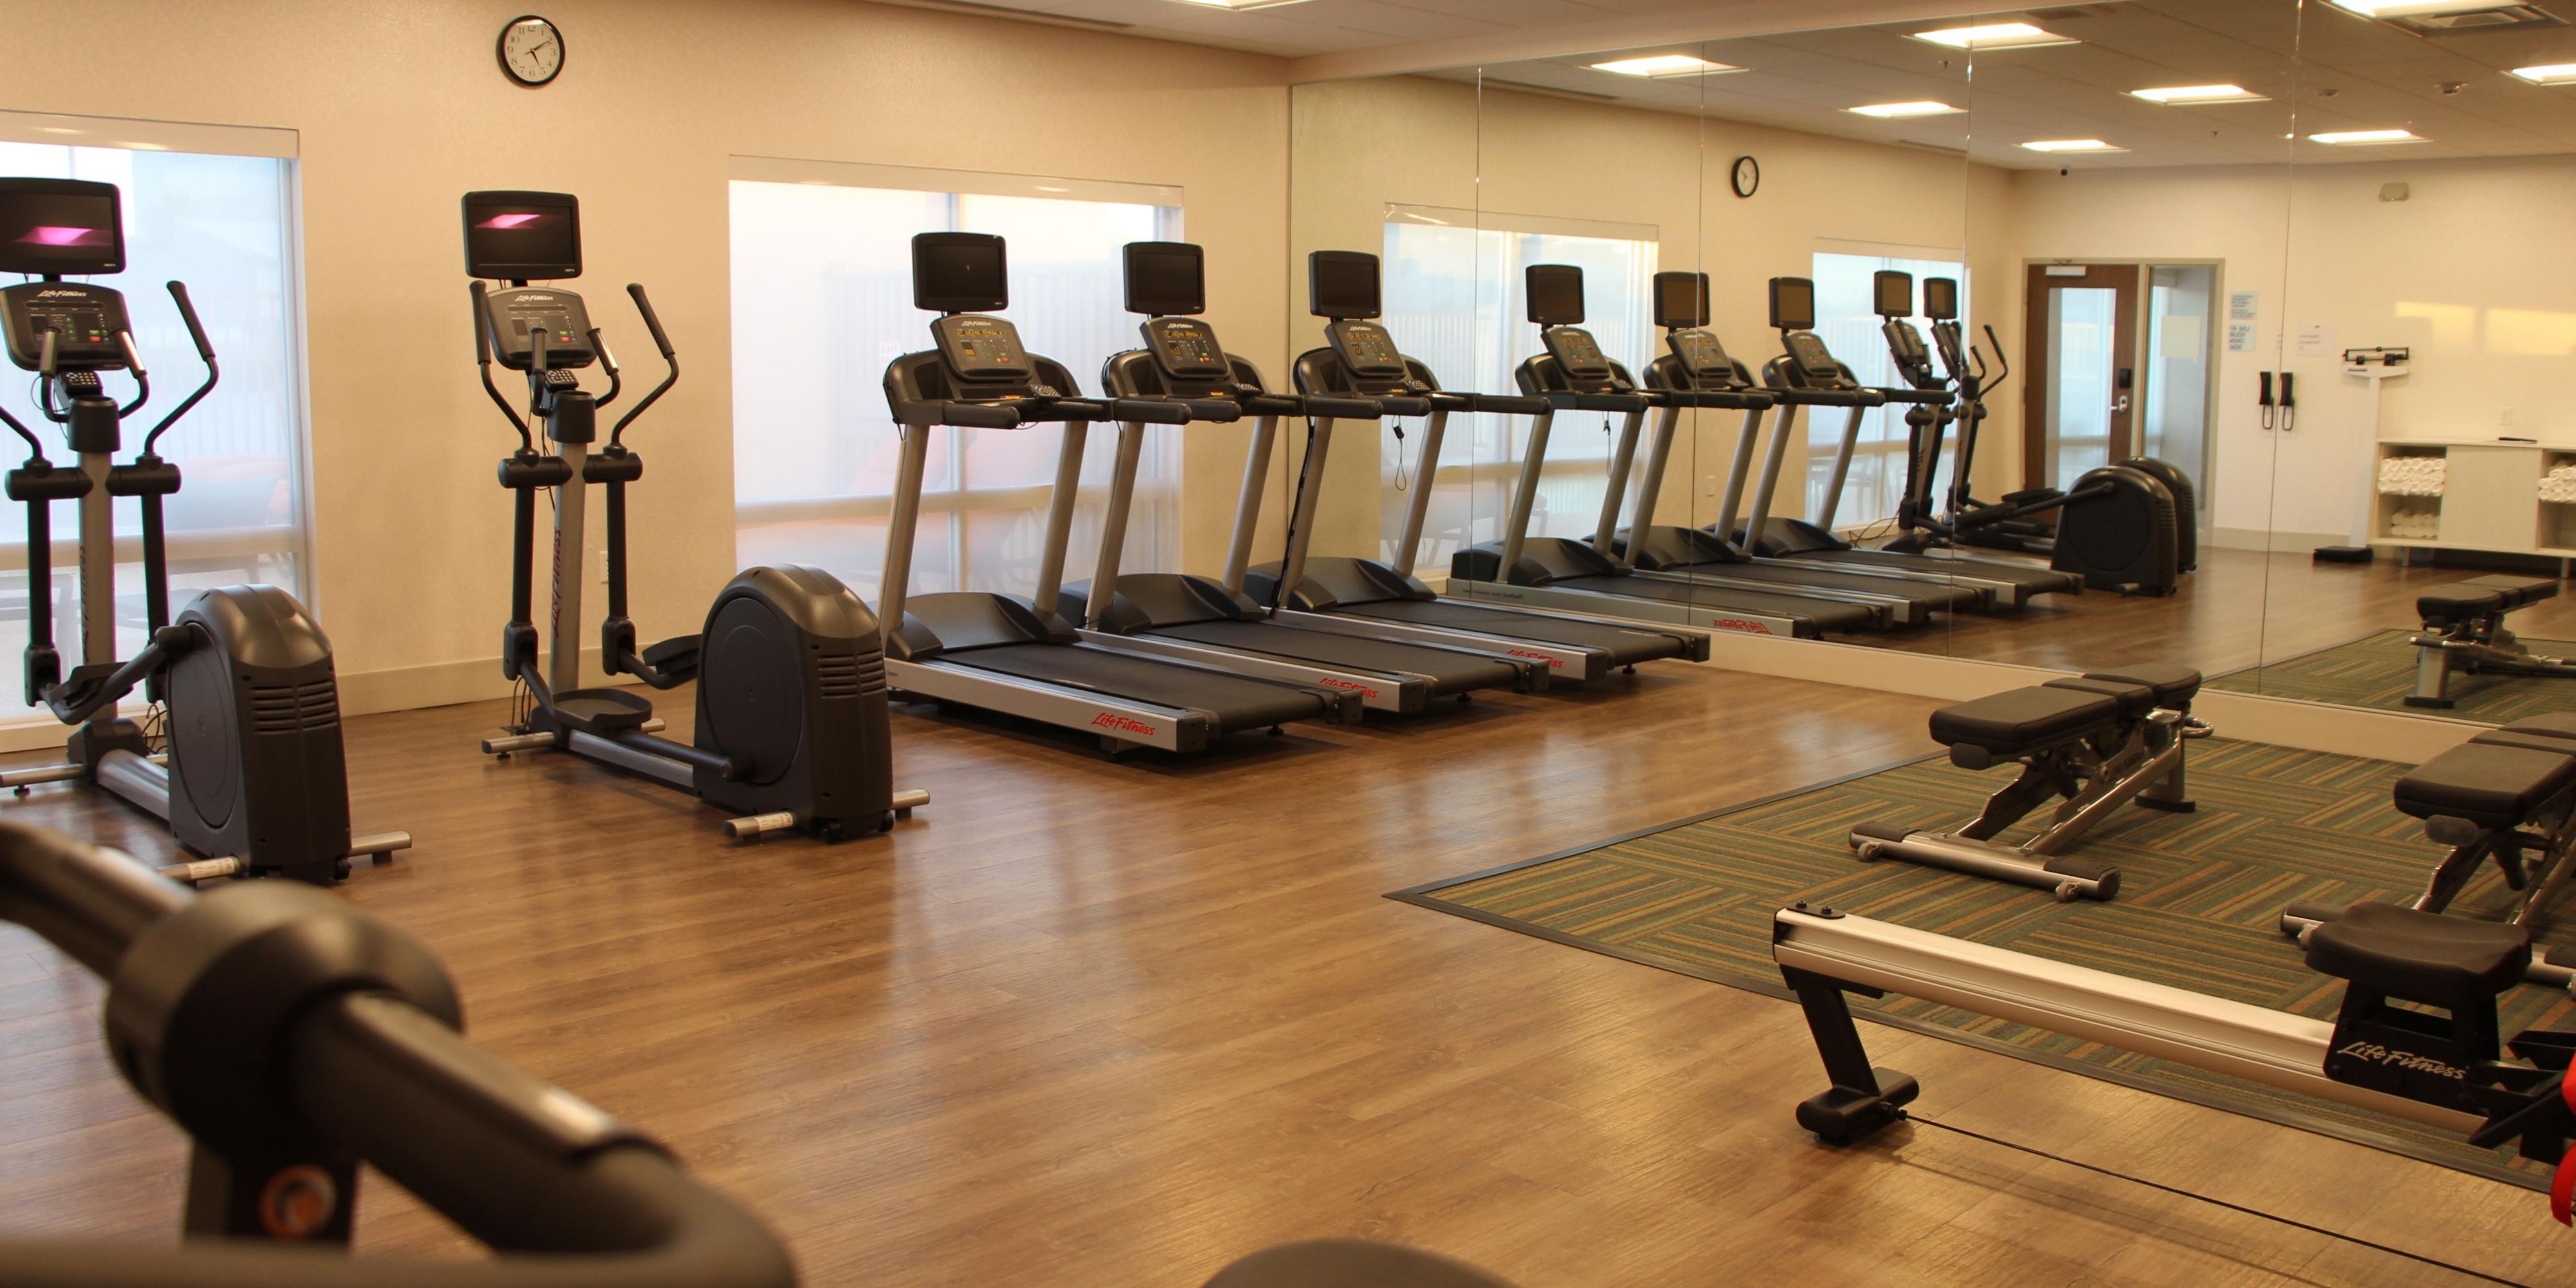 Don't forget to pack your workout gear! We've got a beautiful, new and large fitness center including 3 treadmills, 2 cross trainers, a rowing machine, stationary bike and free weights.  Stay fit while you travel!